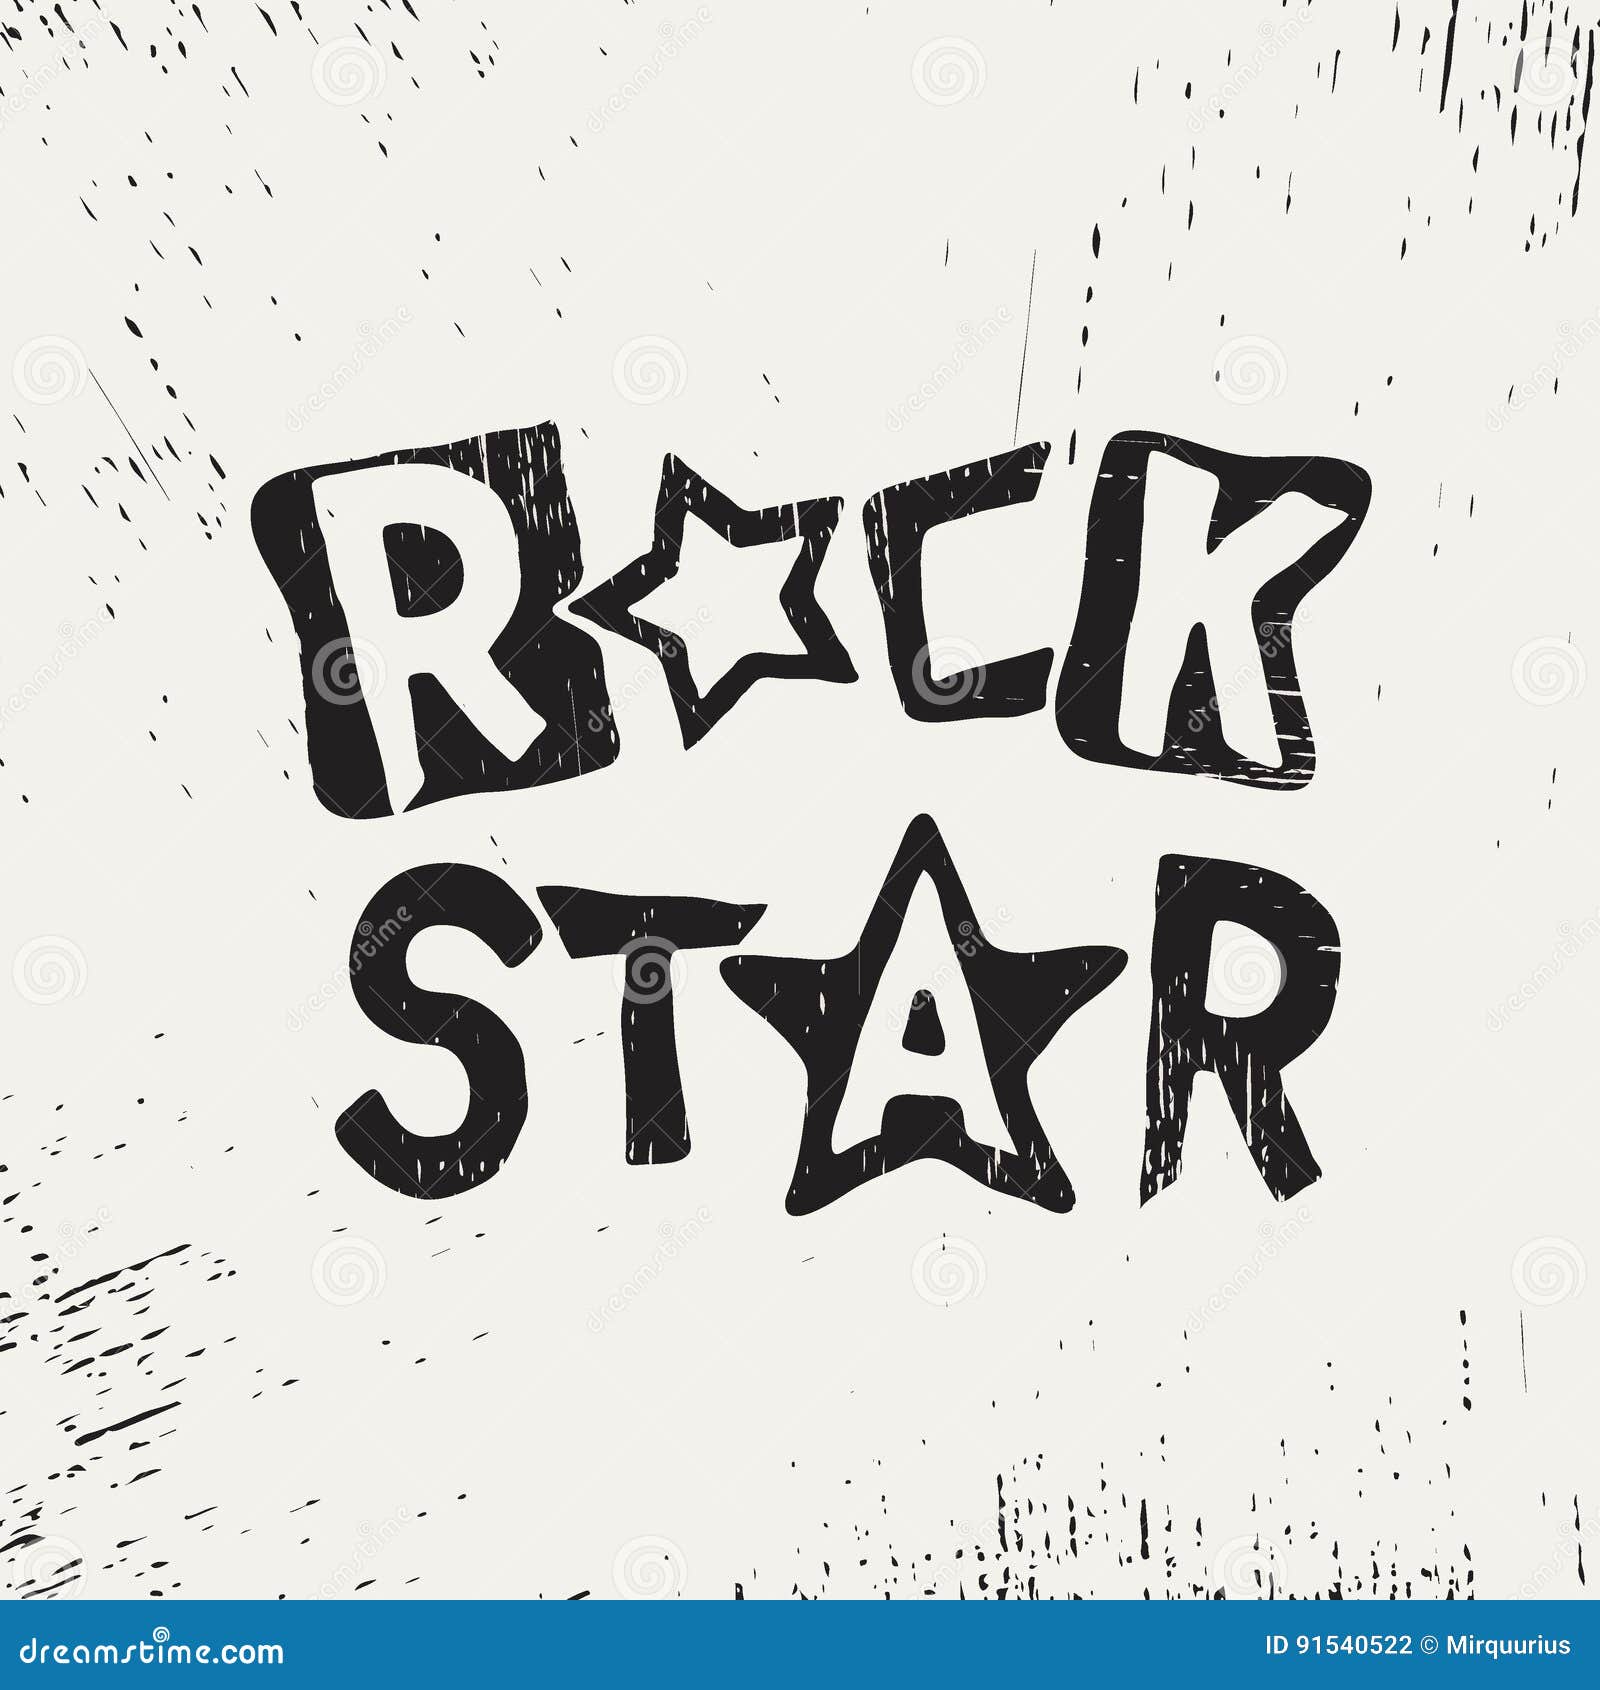 Rock star grunge text stock vector. Illustration of abstract - 91540522